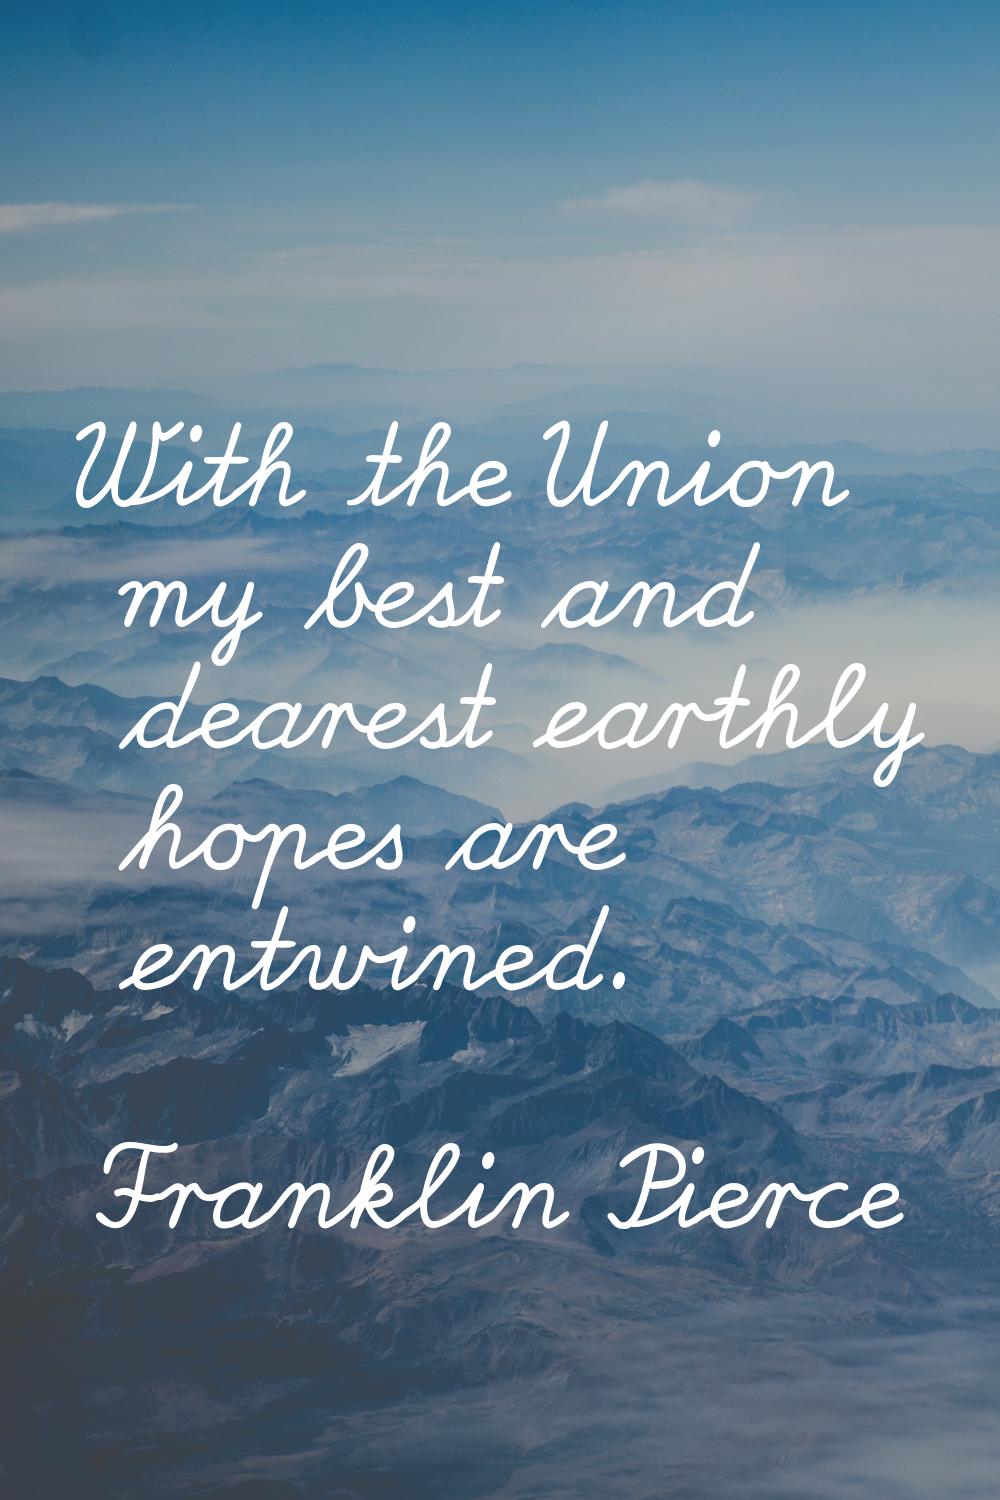 With the Union my best and dearest earthly hopes are entwined.